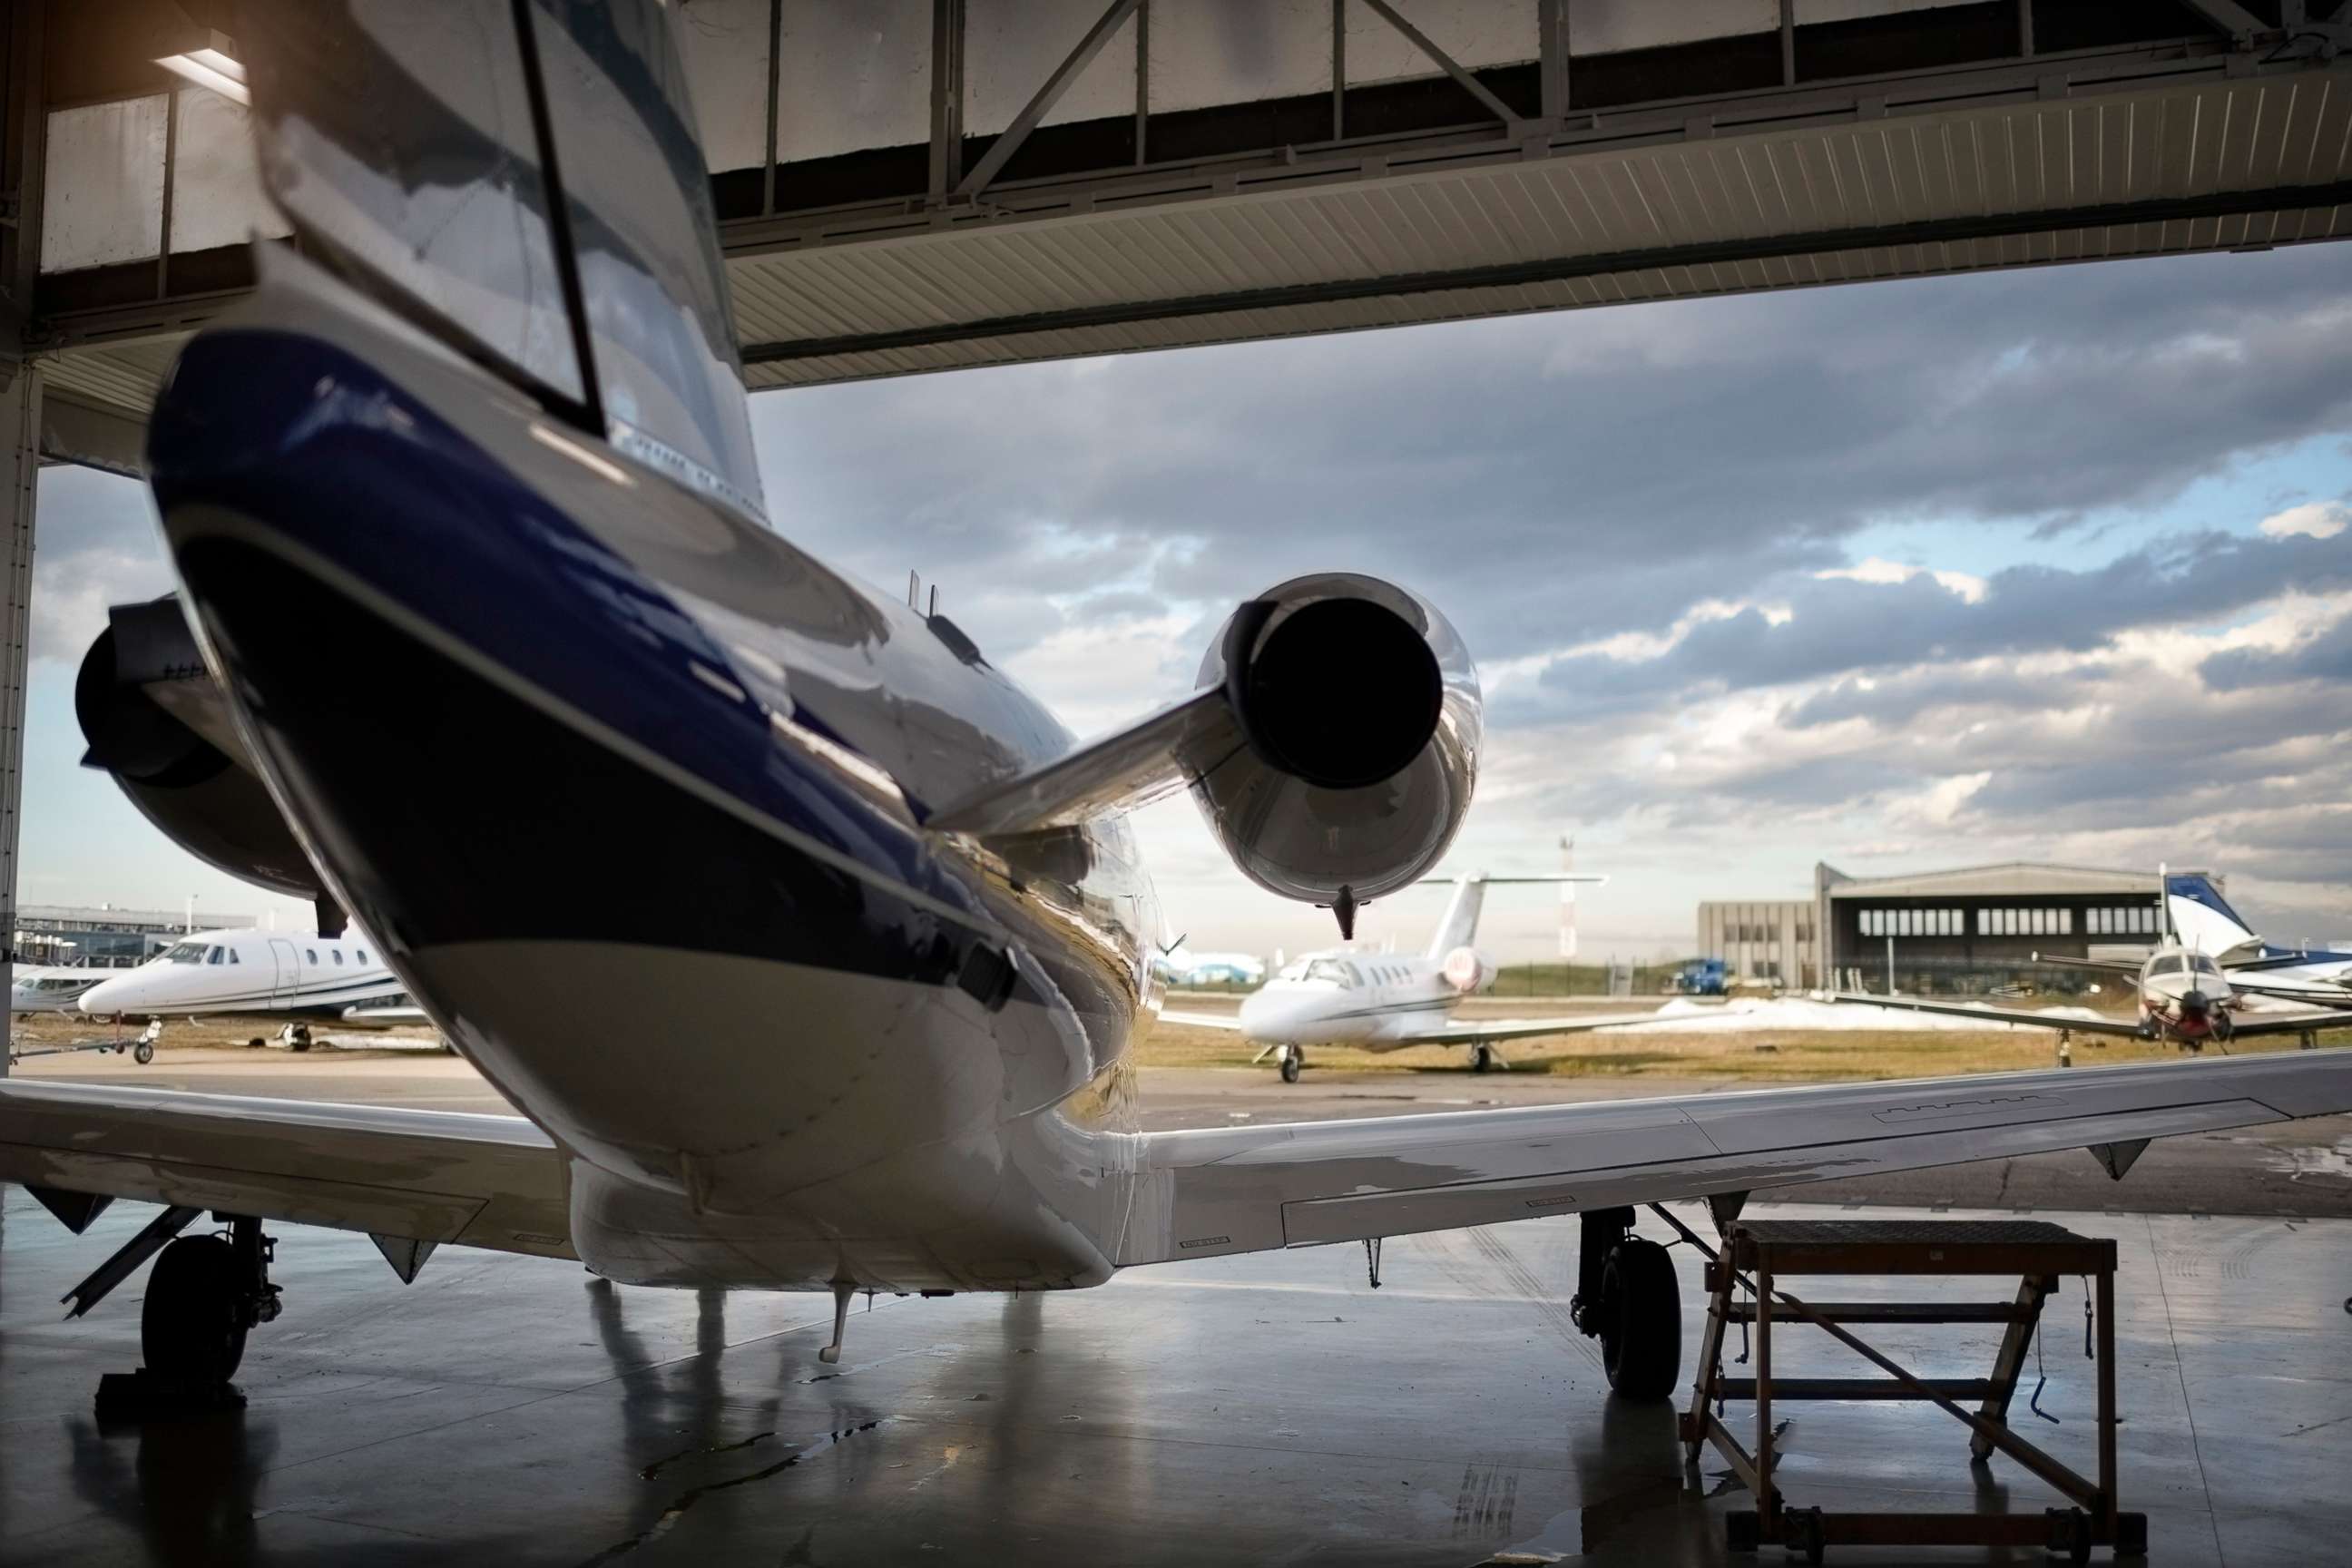 PHOTO: A private jet aircraft in a hangar in an undated stock photo.